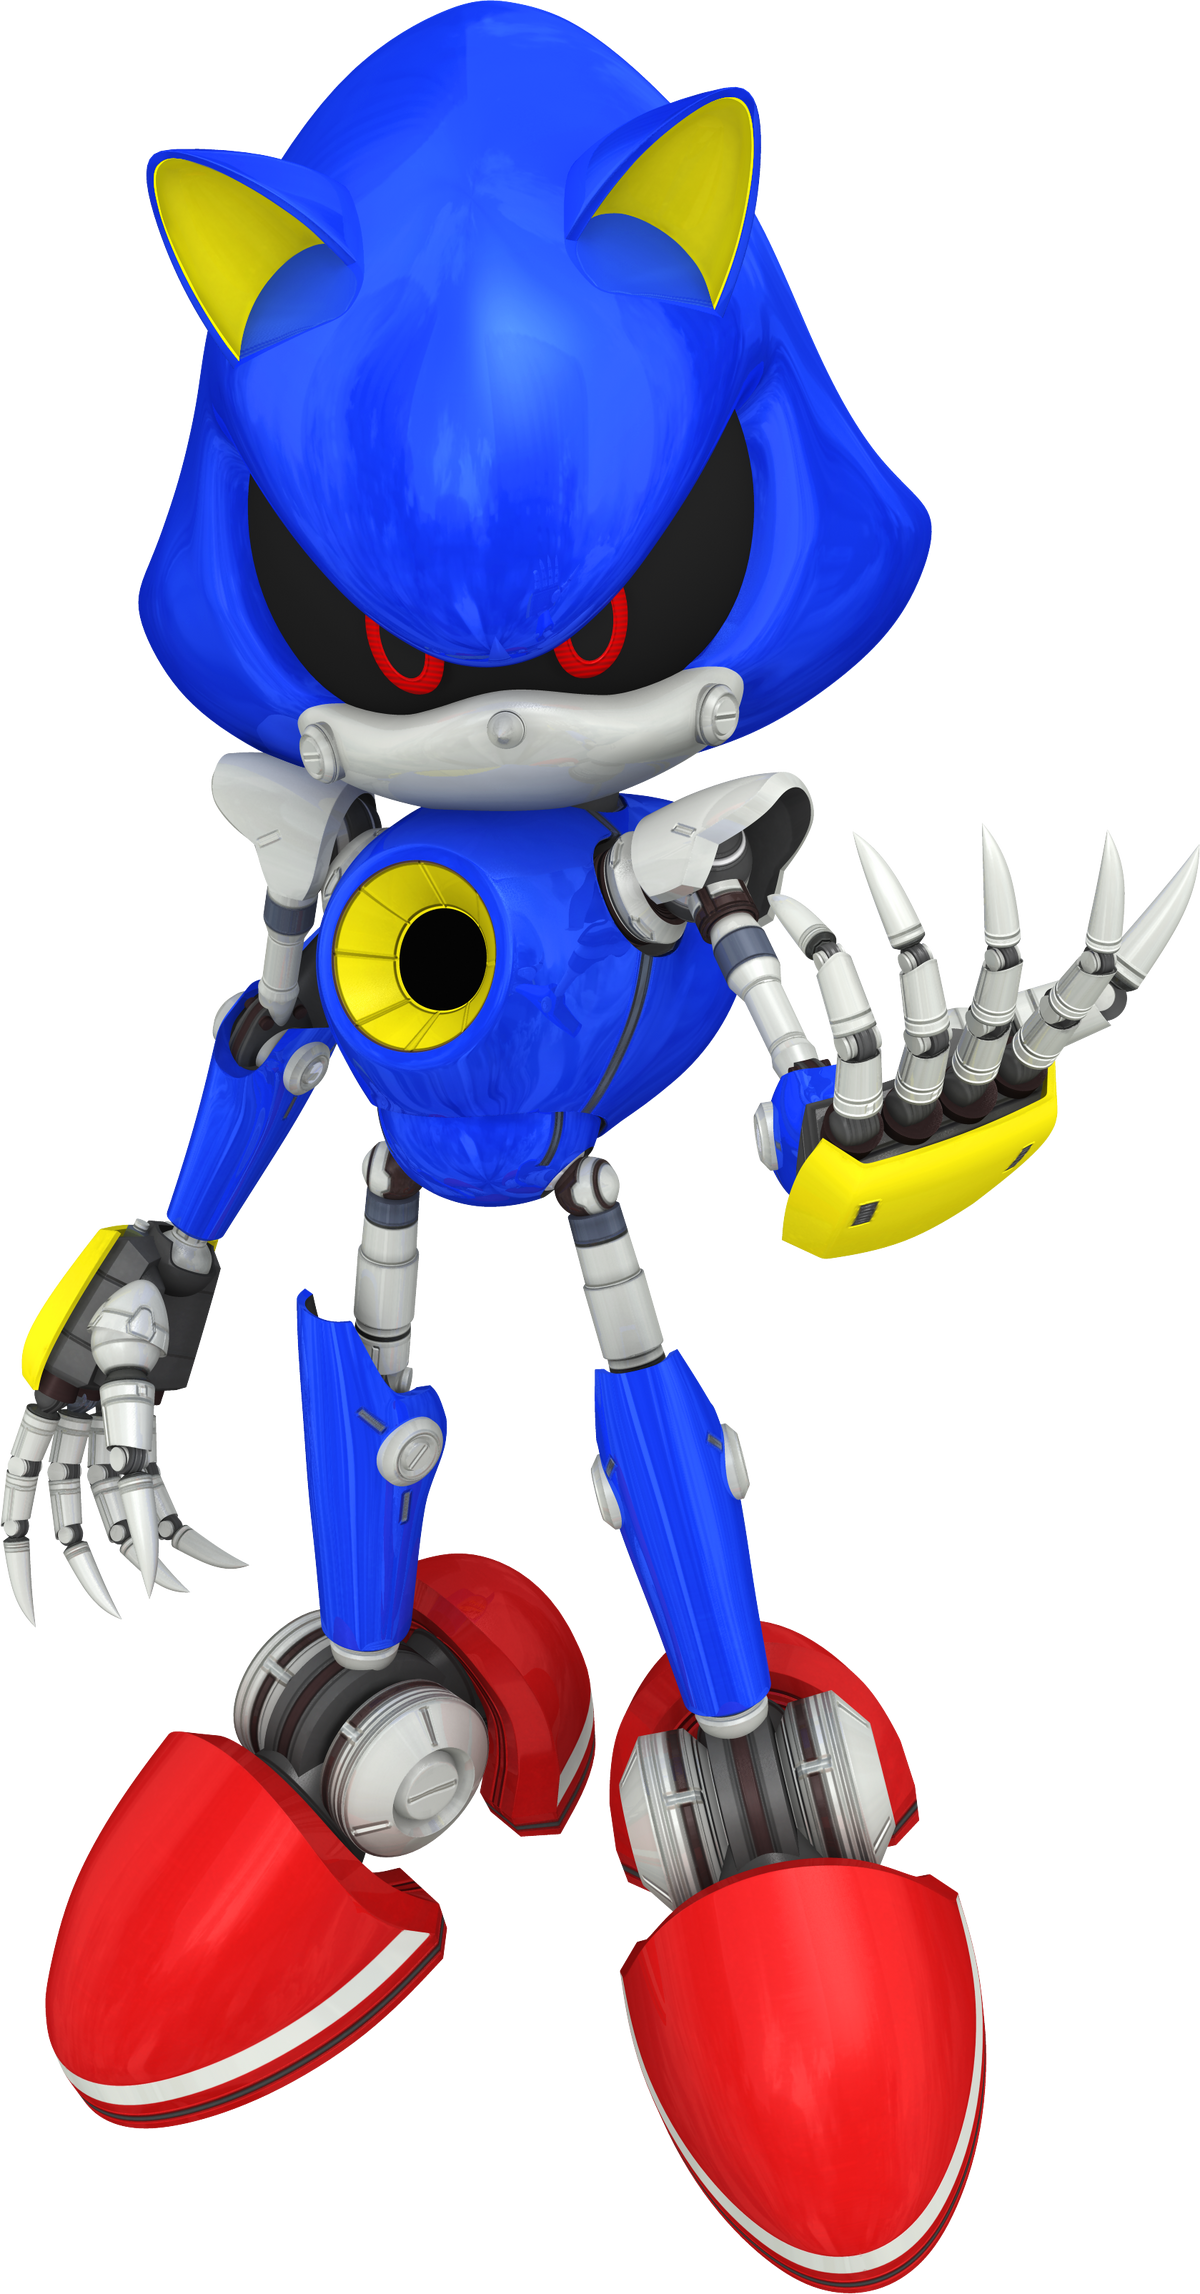 Little theory about the Sonic robots (keep in mind this is based